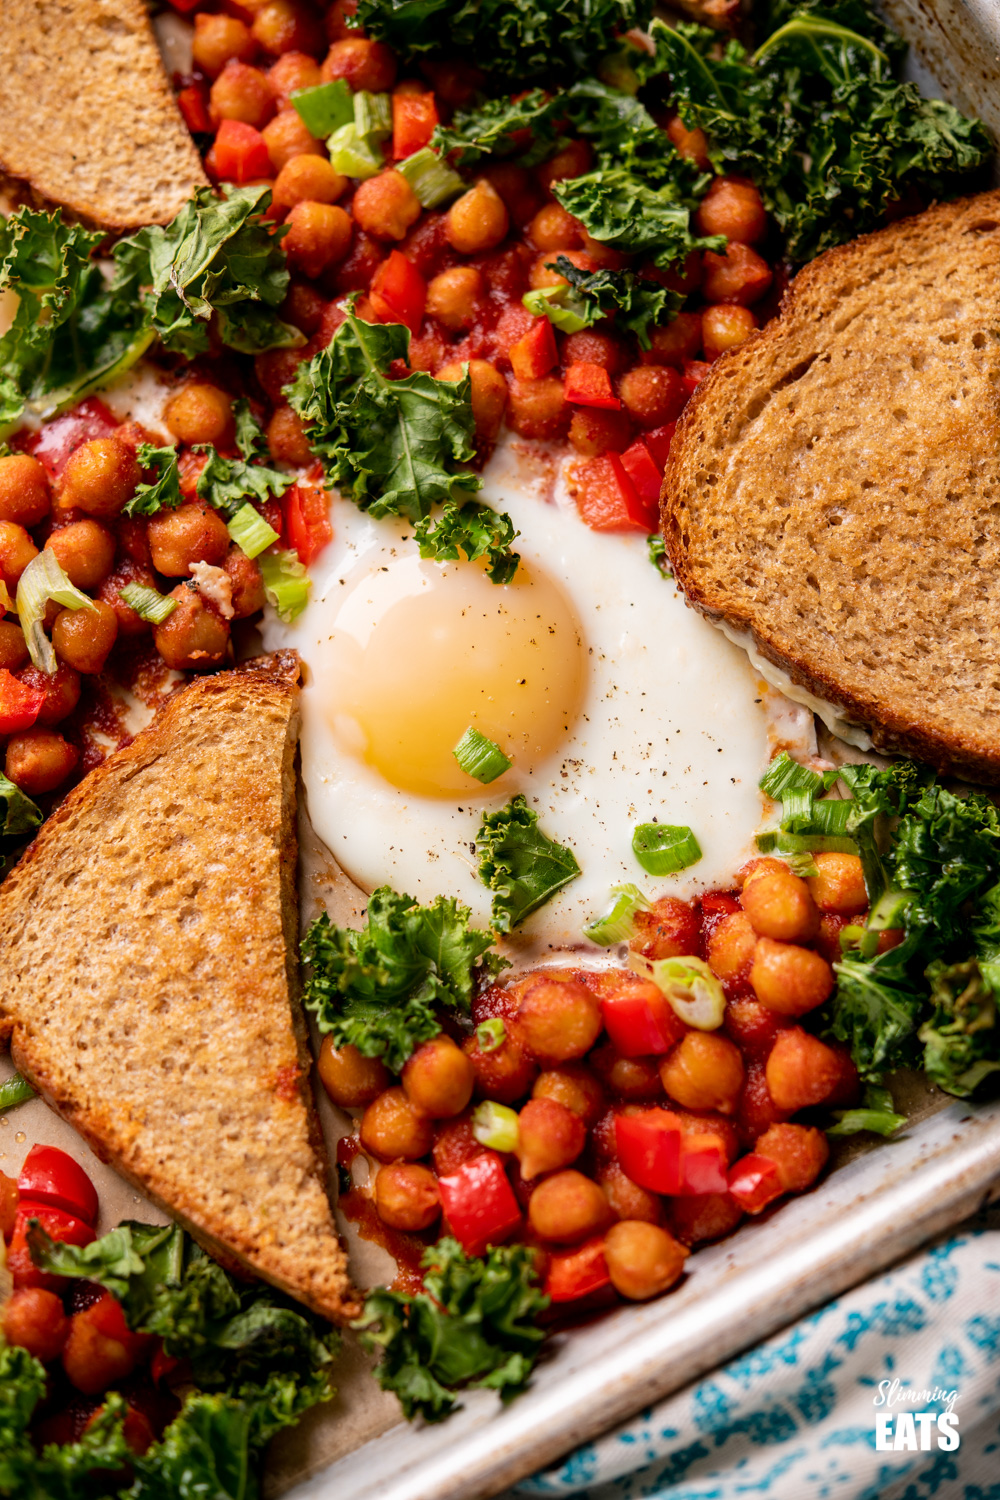 close up of chickpeas, egg and toast with kale on tray